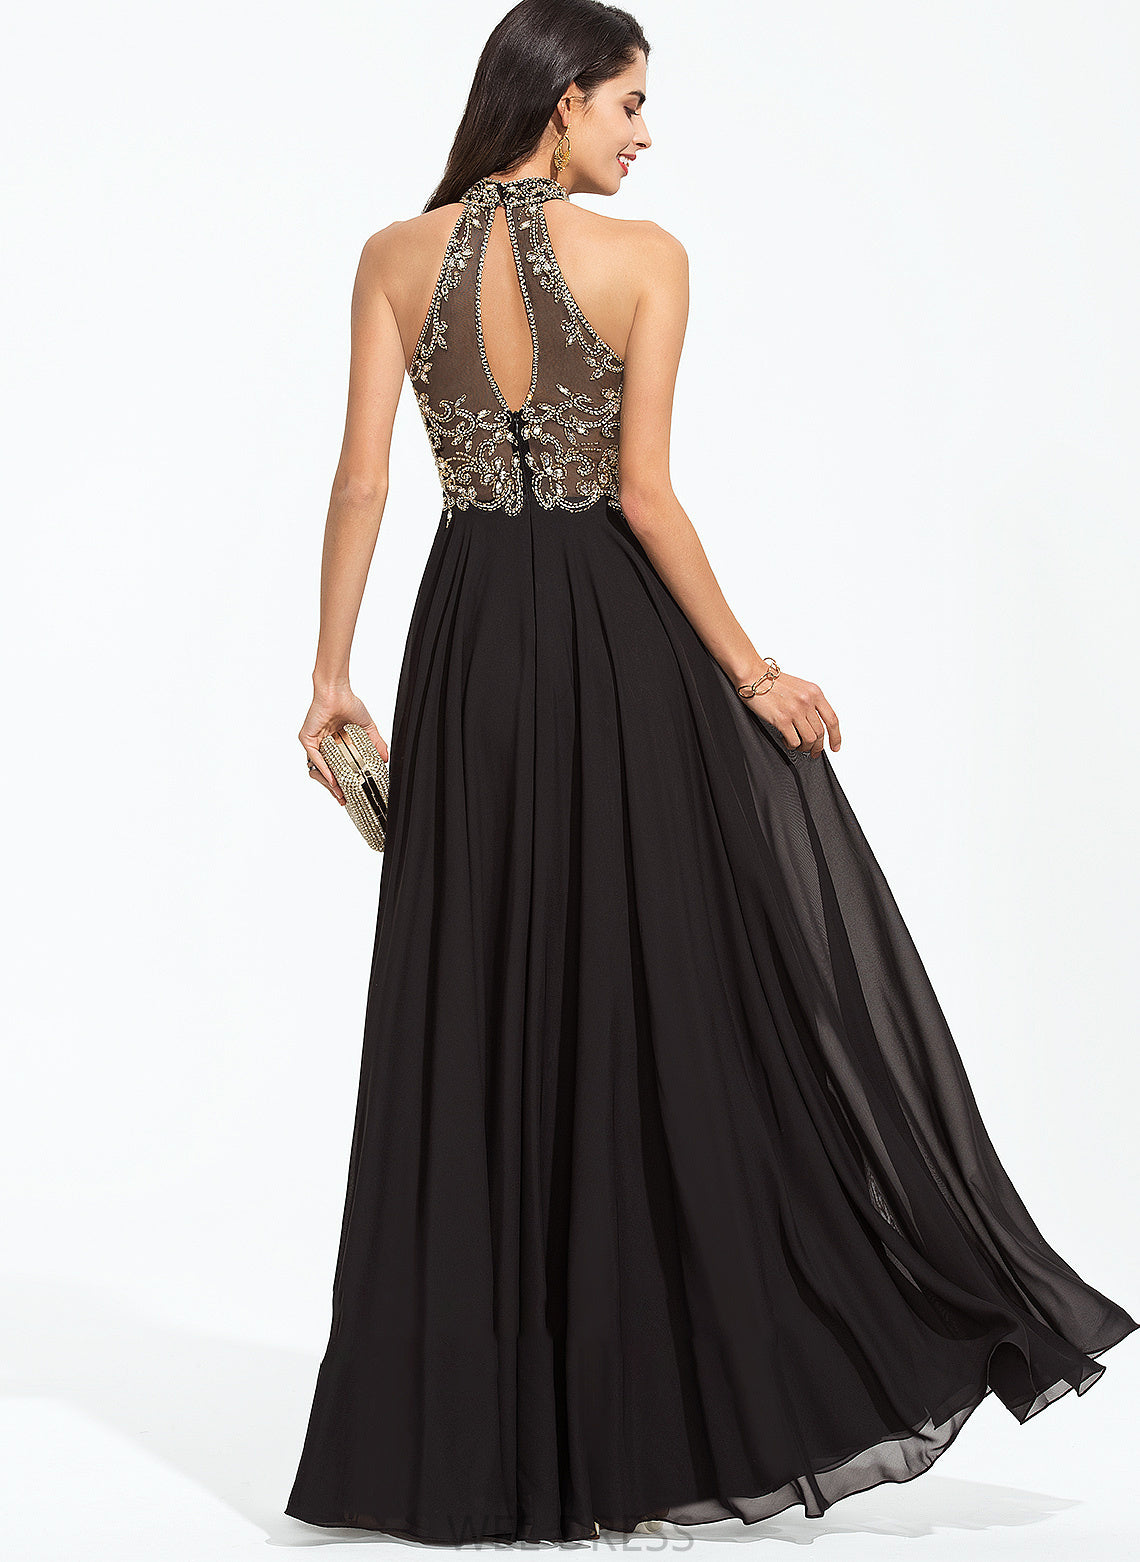 Floor-Length Prom Dresses Nathaly Chiffon Beading With A-Line High Neck Sequins